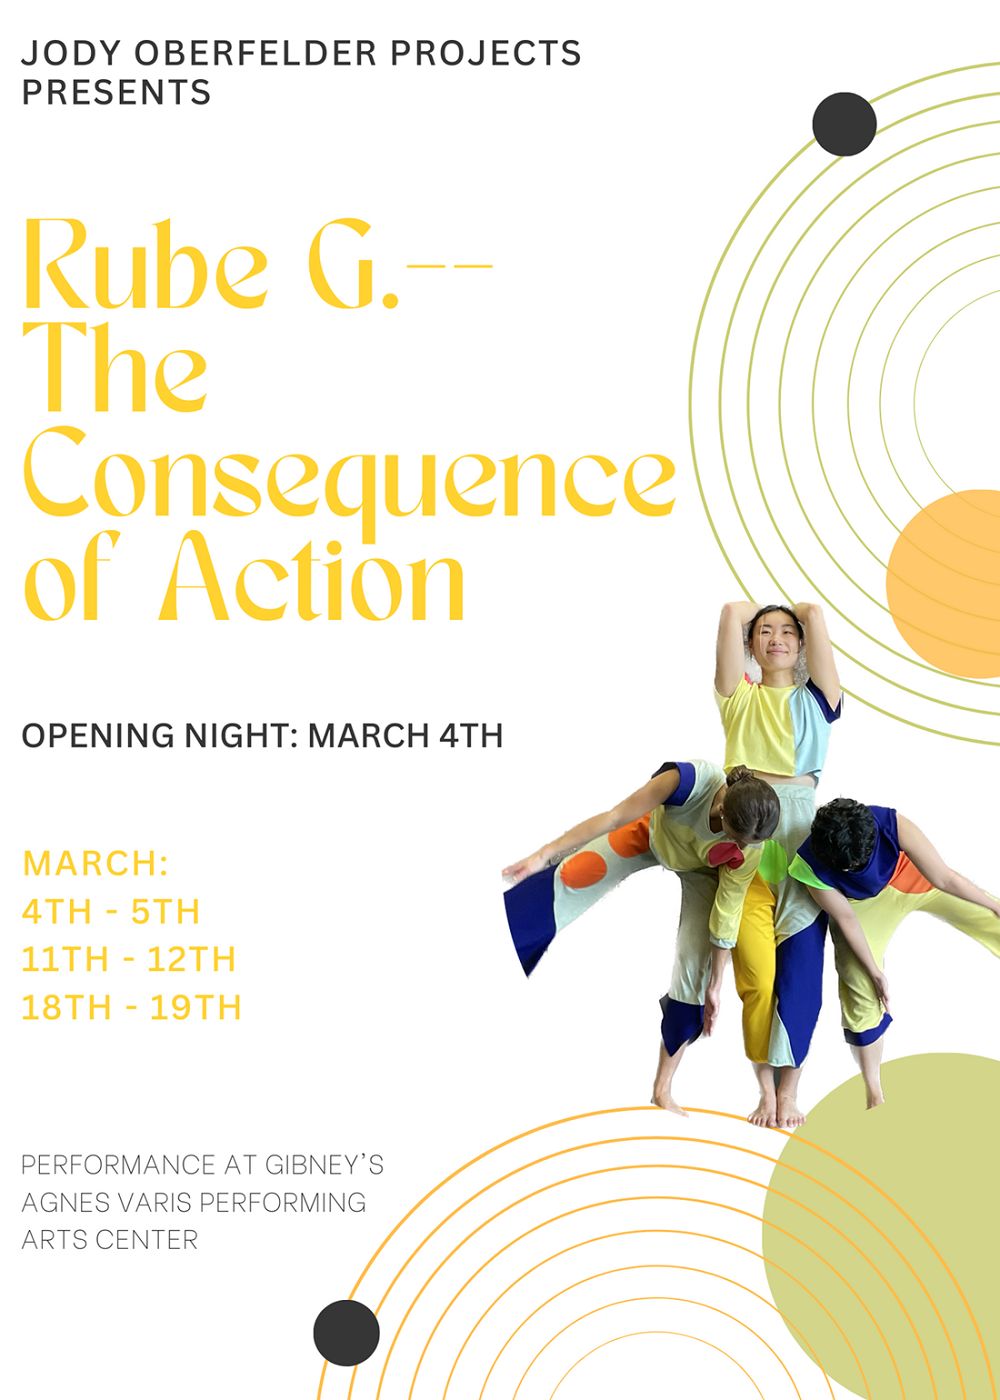 Jody Oberfelder Rube G The Consequence of Action